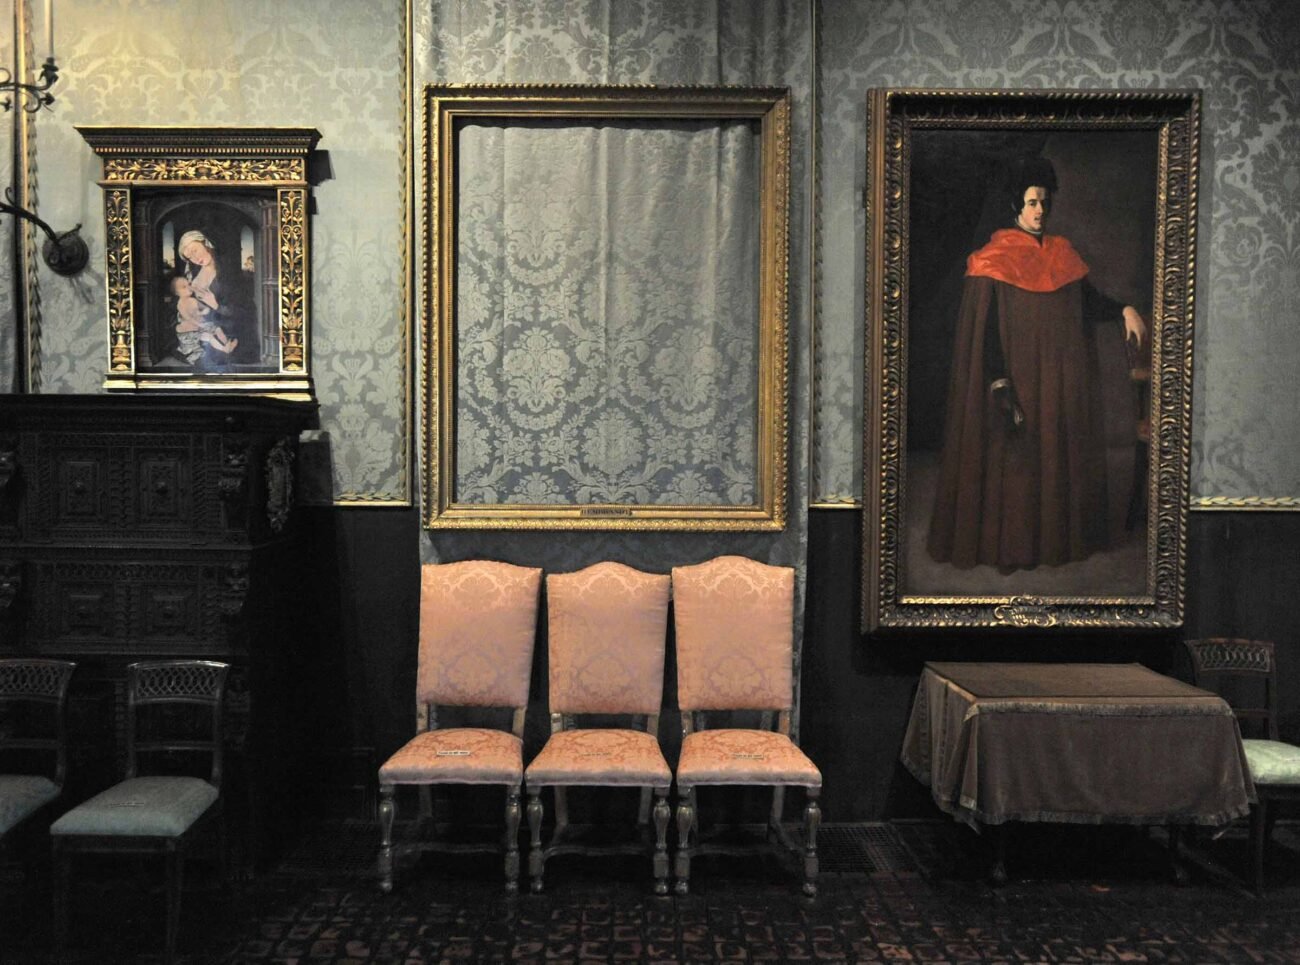 St. Patrick's Day, 1990 was a life-changing event for the Isabella Stewart Gardner Museum, but not in a good way. $500 million in art remains missing.